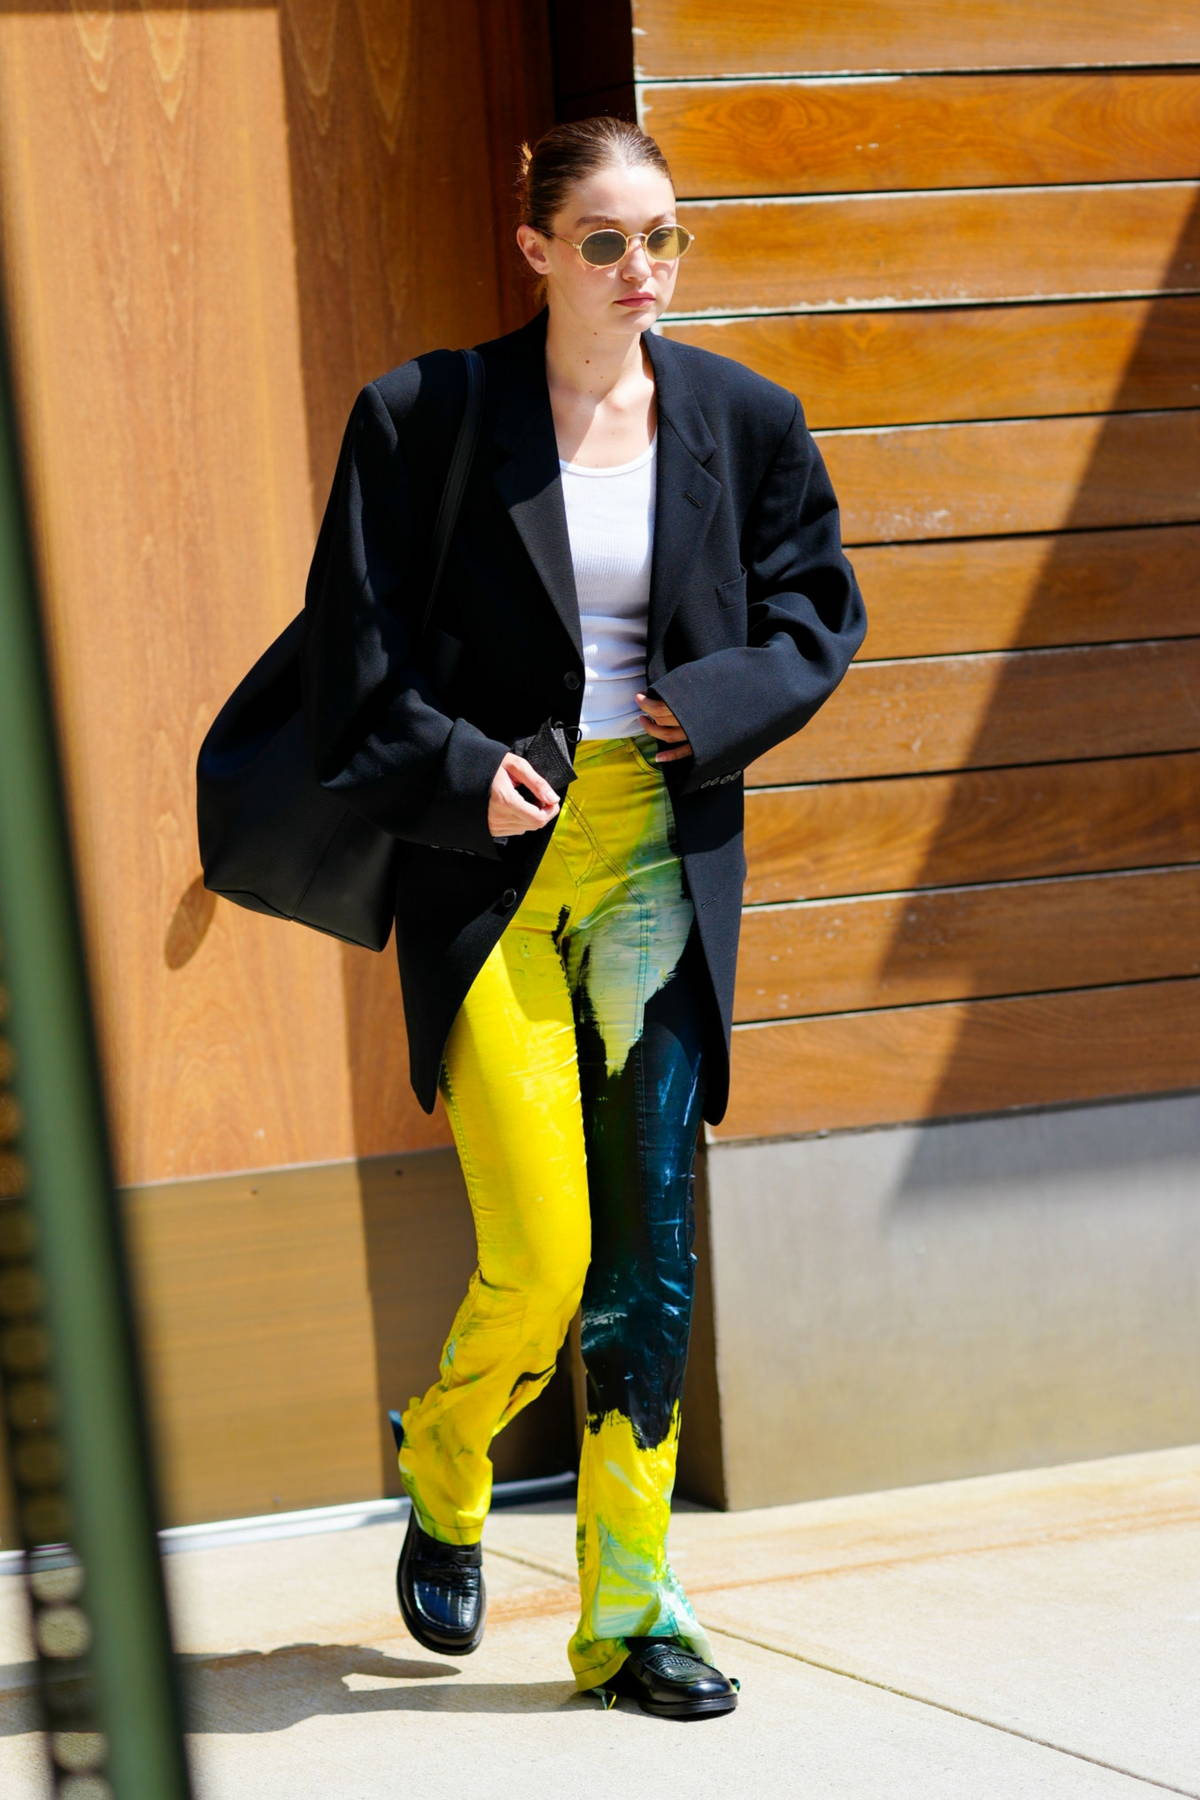 gigi hadid looks trendy in bright yellow pants and black blazer while  heading out in new york city-080921_9